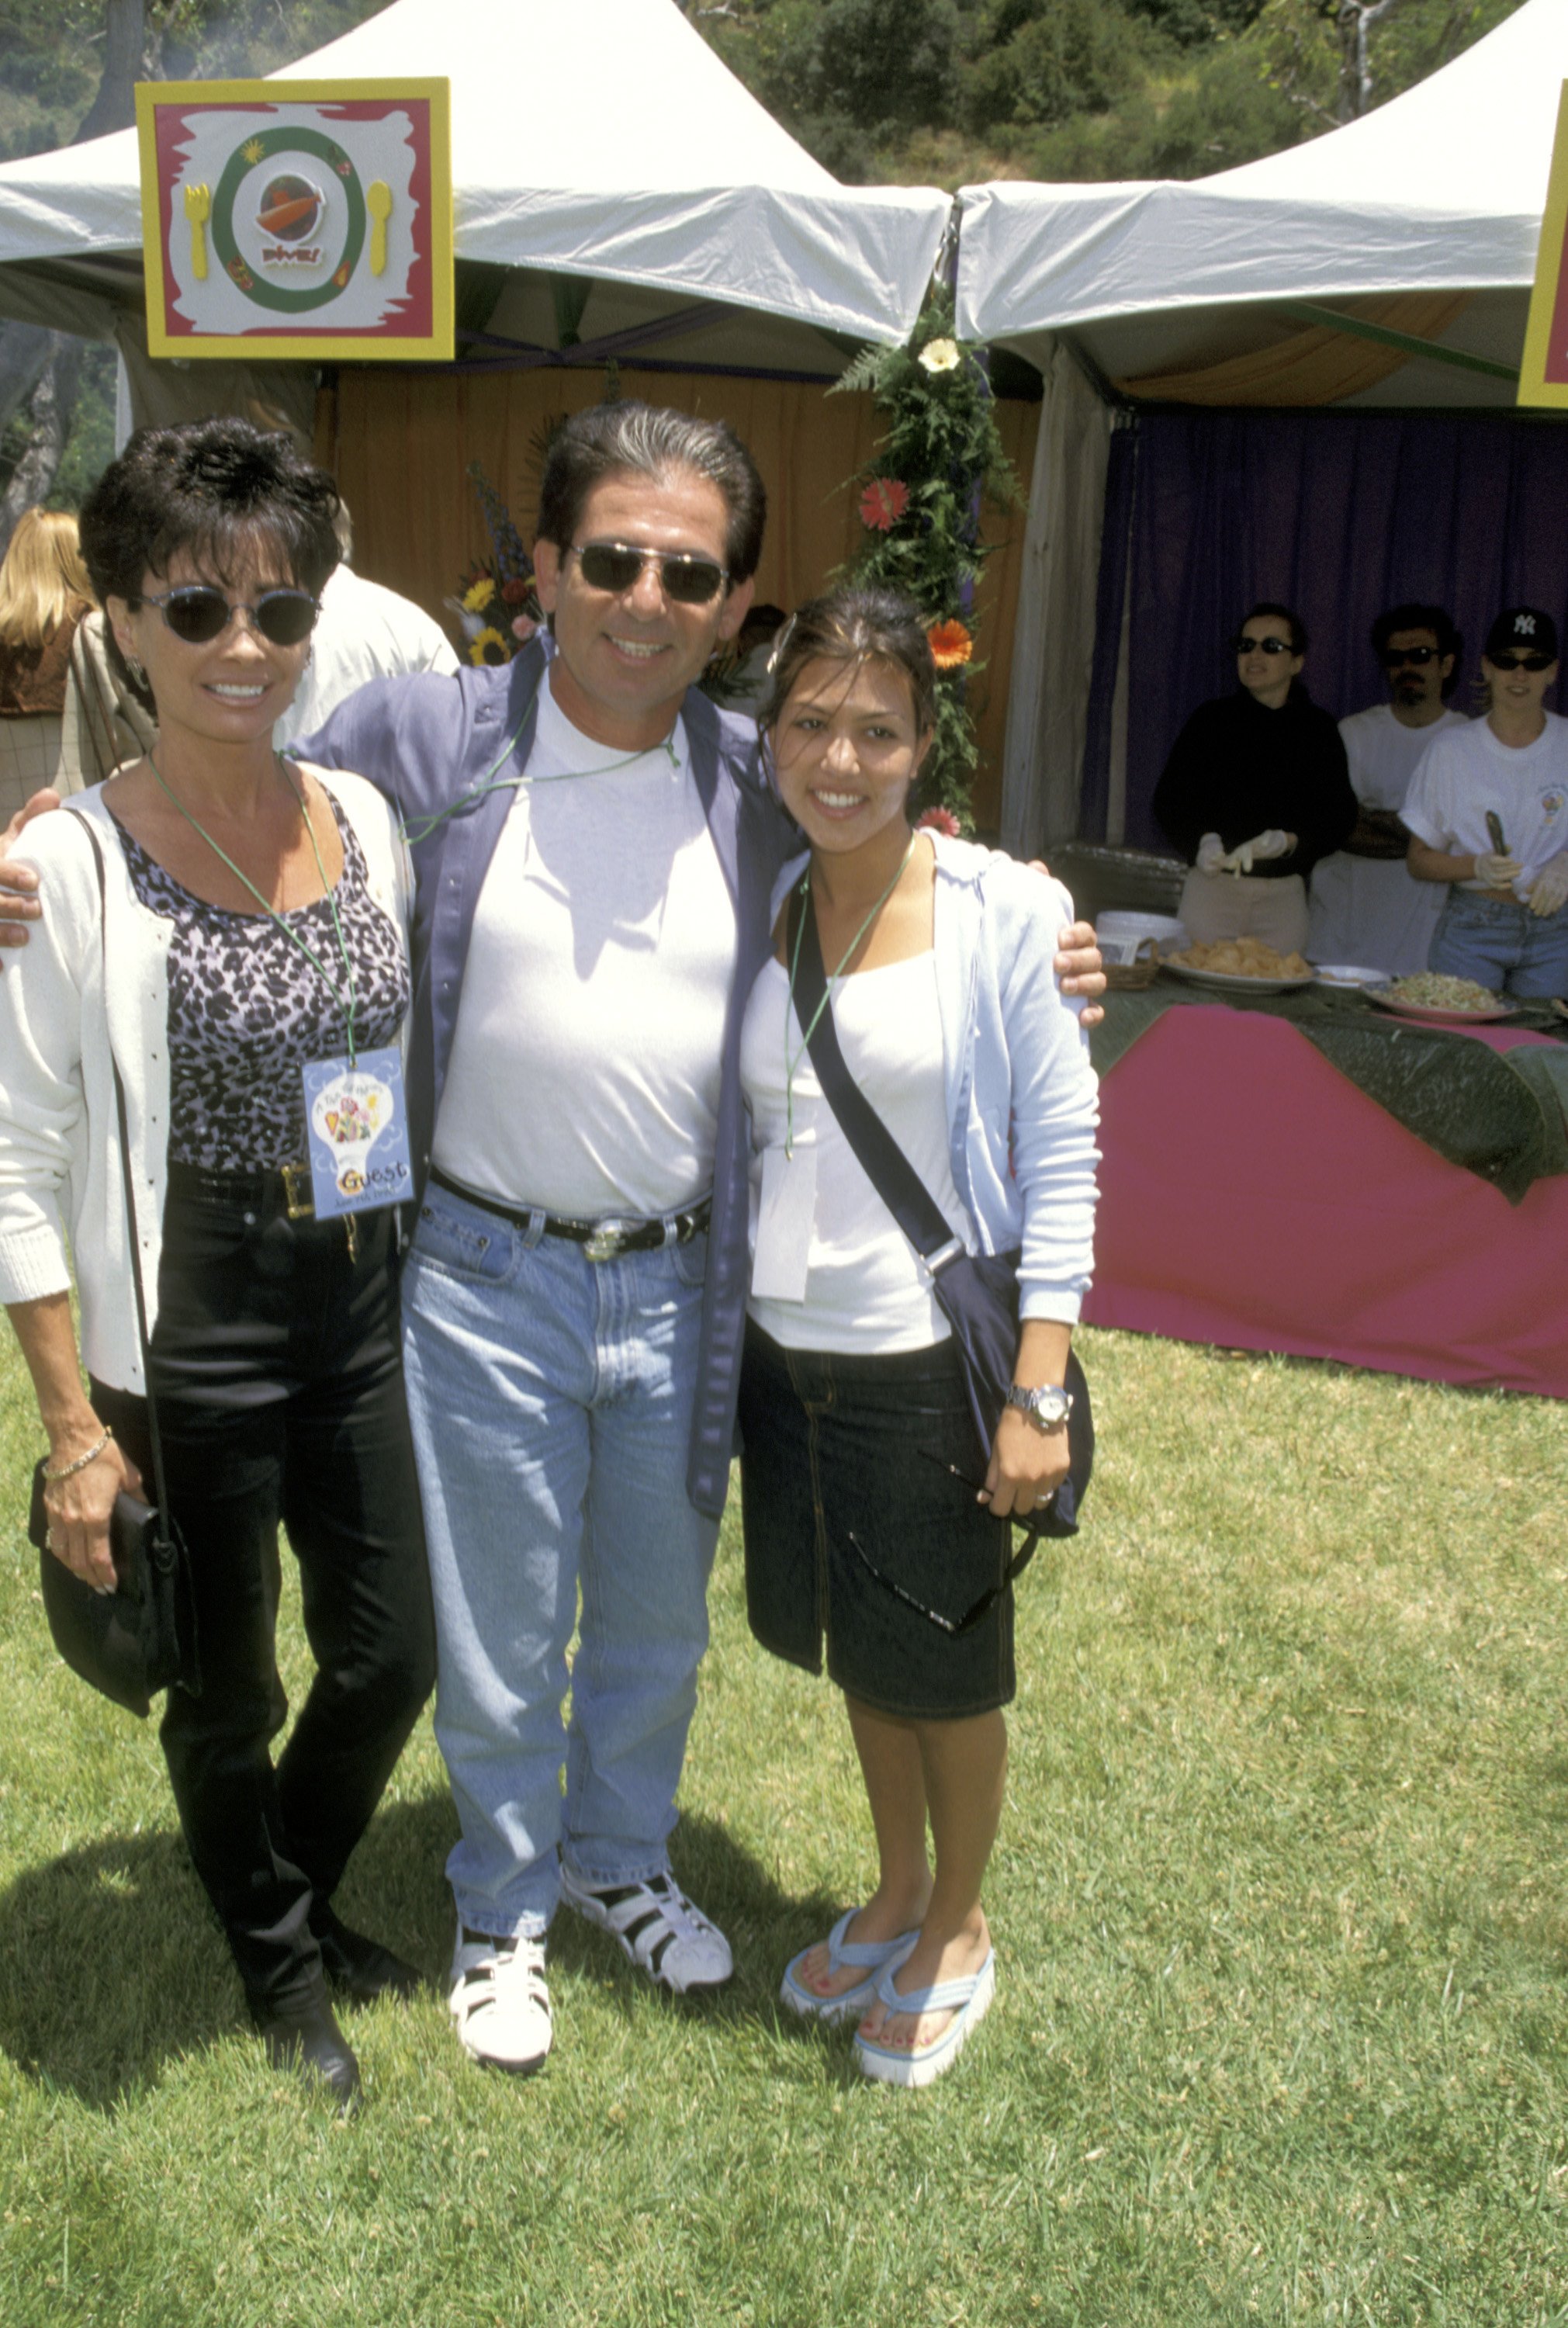 Robert Kardashian and daughter Kourtney at the Ninth Annual 'A Time For Heroes' E. Glaser Pediatric AIDS Association Benefit in 1998 | Source: Getty Images